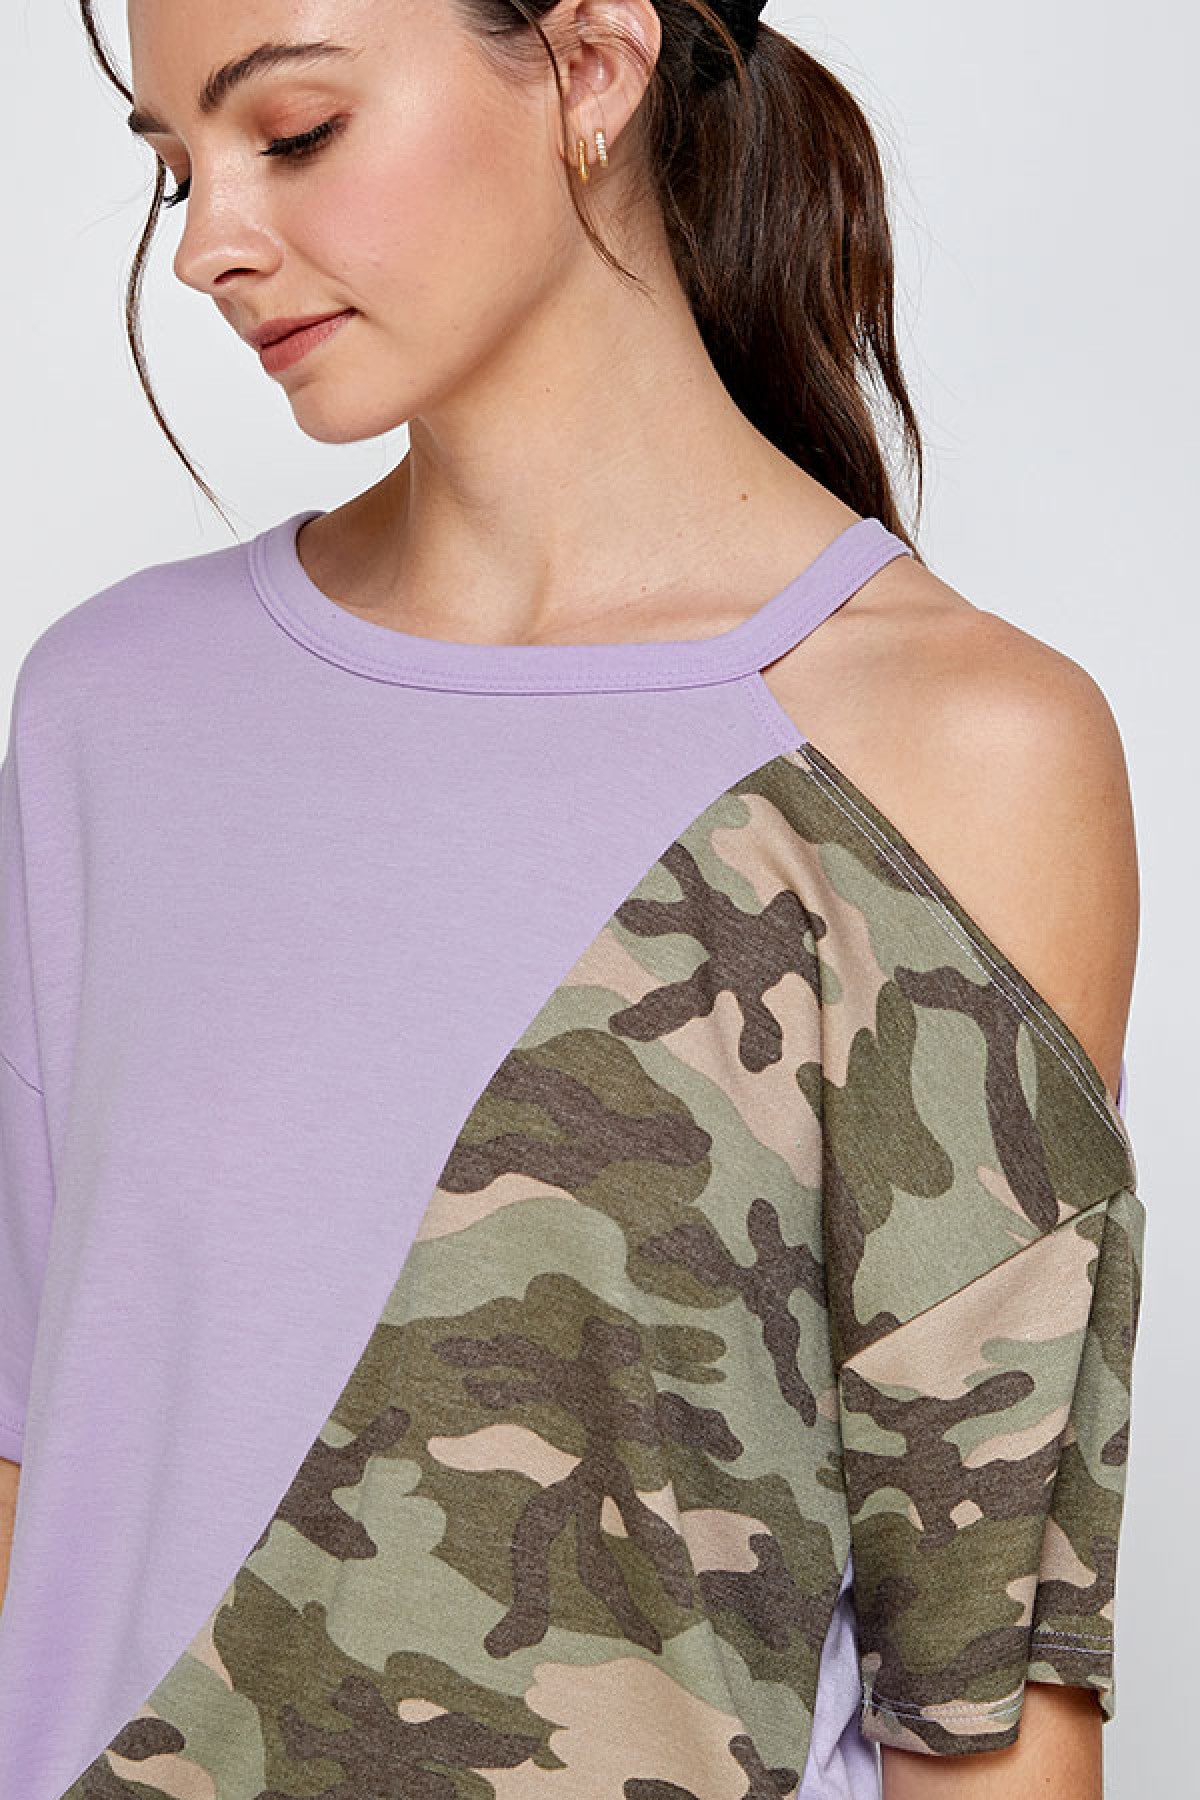 LAVENDER OLIVE CAMOUFLAGE PLUS SIZE TOP  2-2-2 (NOW $5.00 ONLY!)